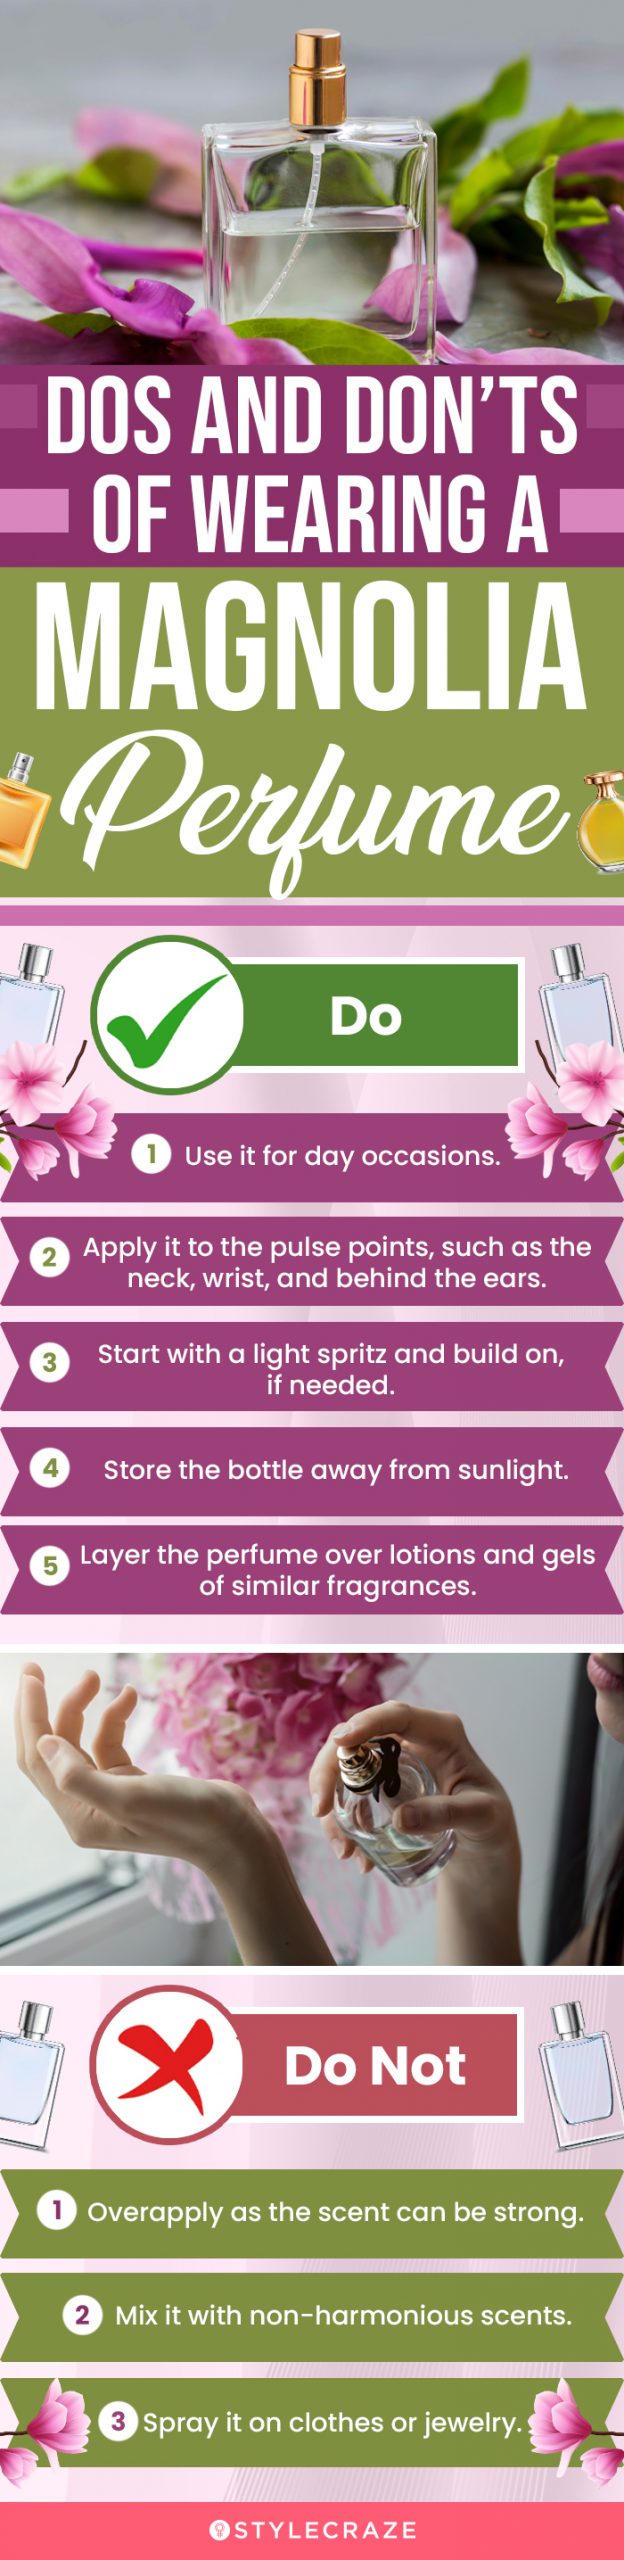 Dos And Don’ts Of Wearing A Magnolia Perfume (infographic)